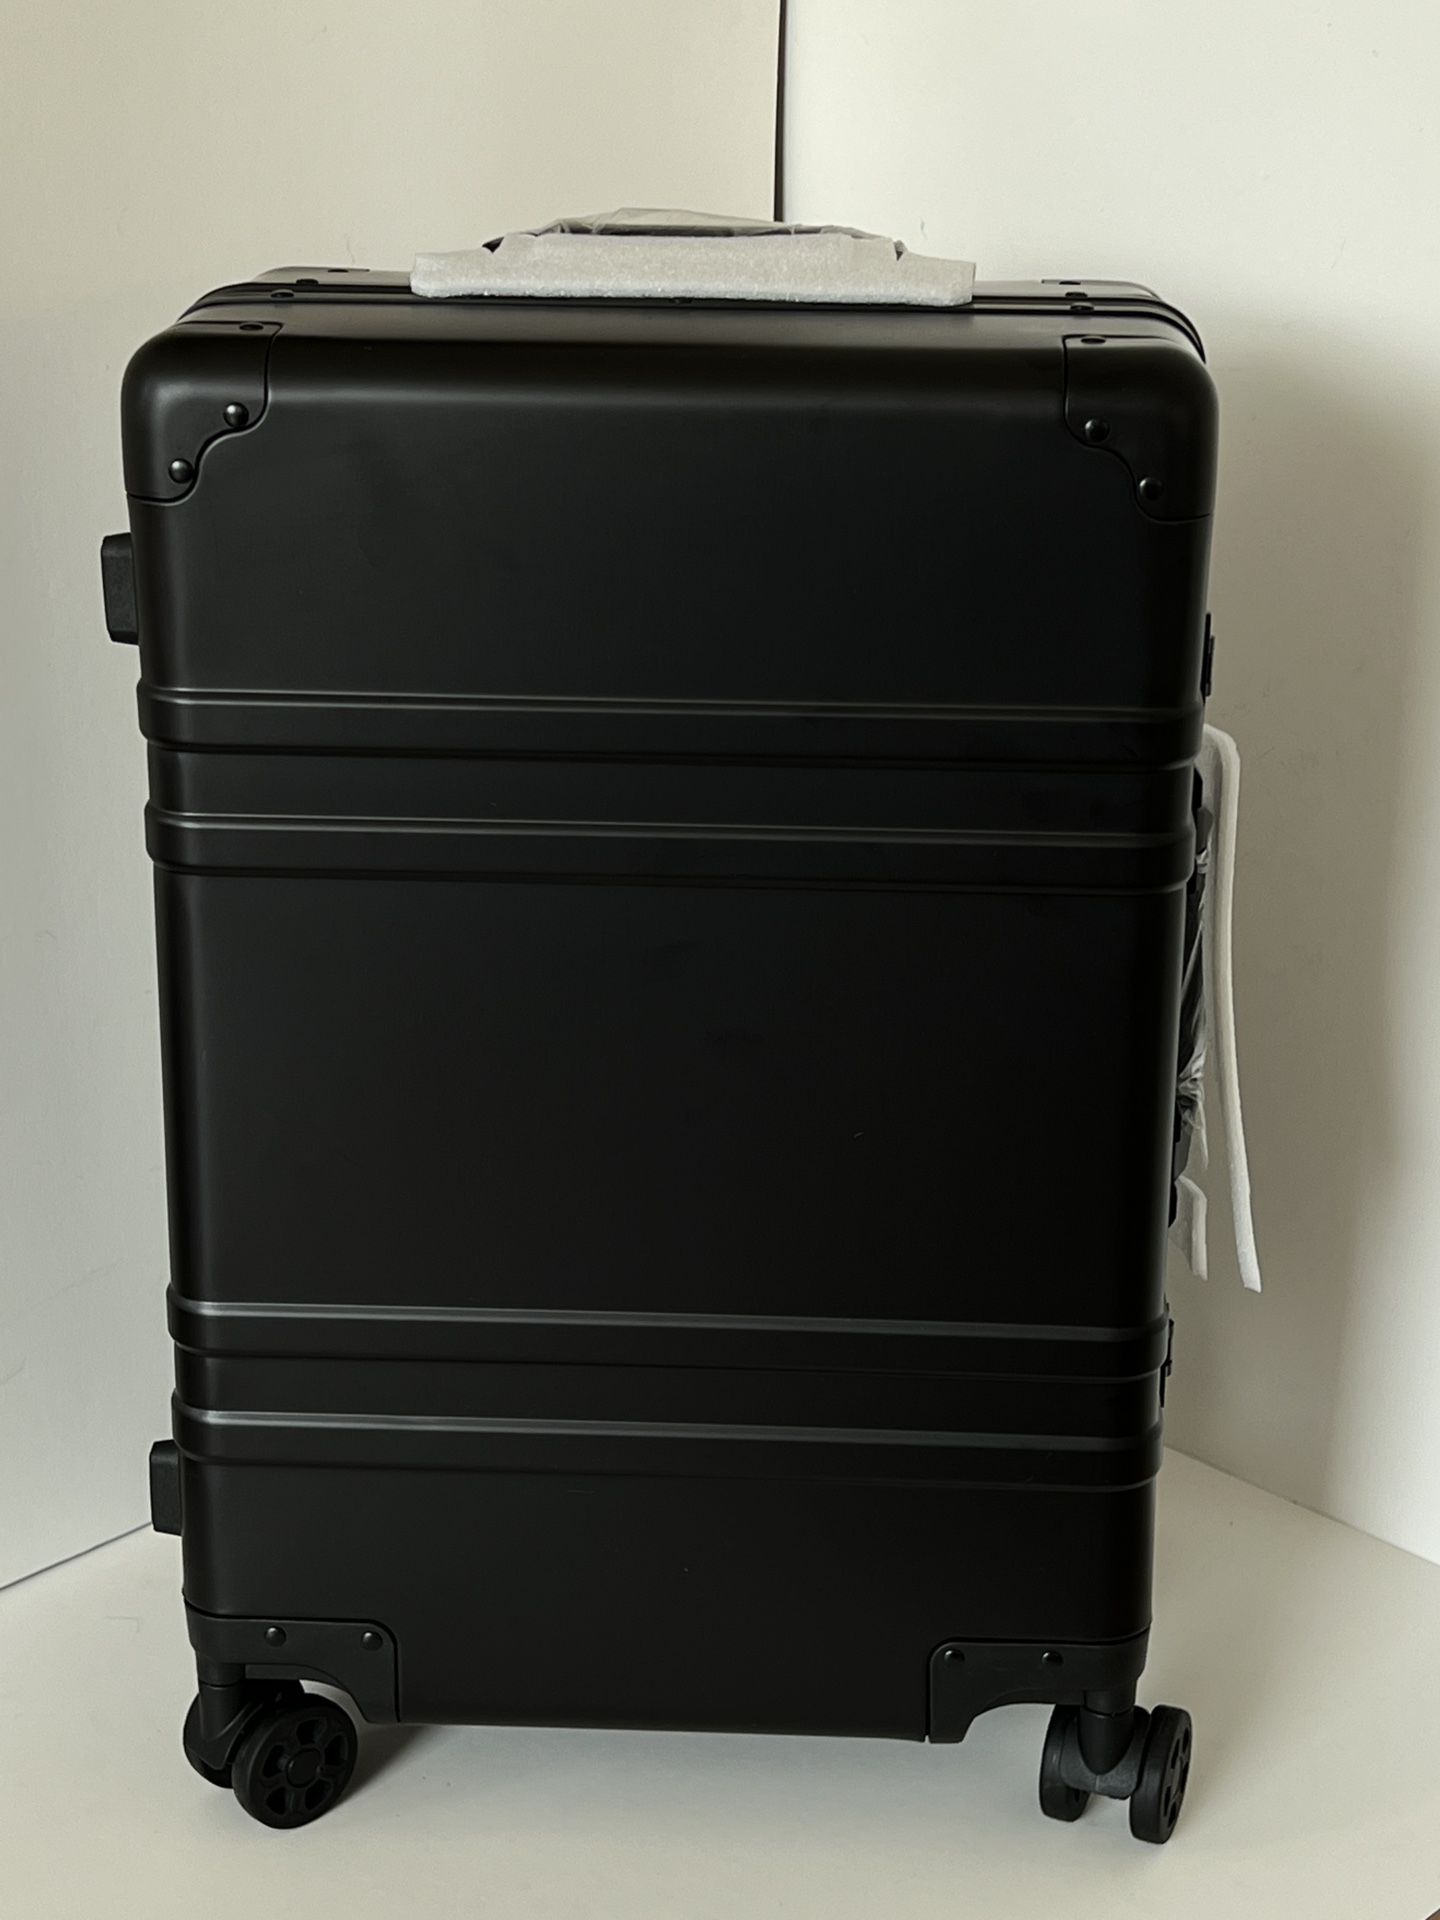 Luggage Aluminum Carry-on Silver or Black